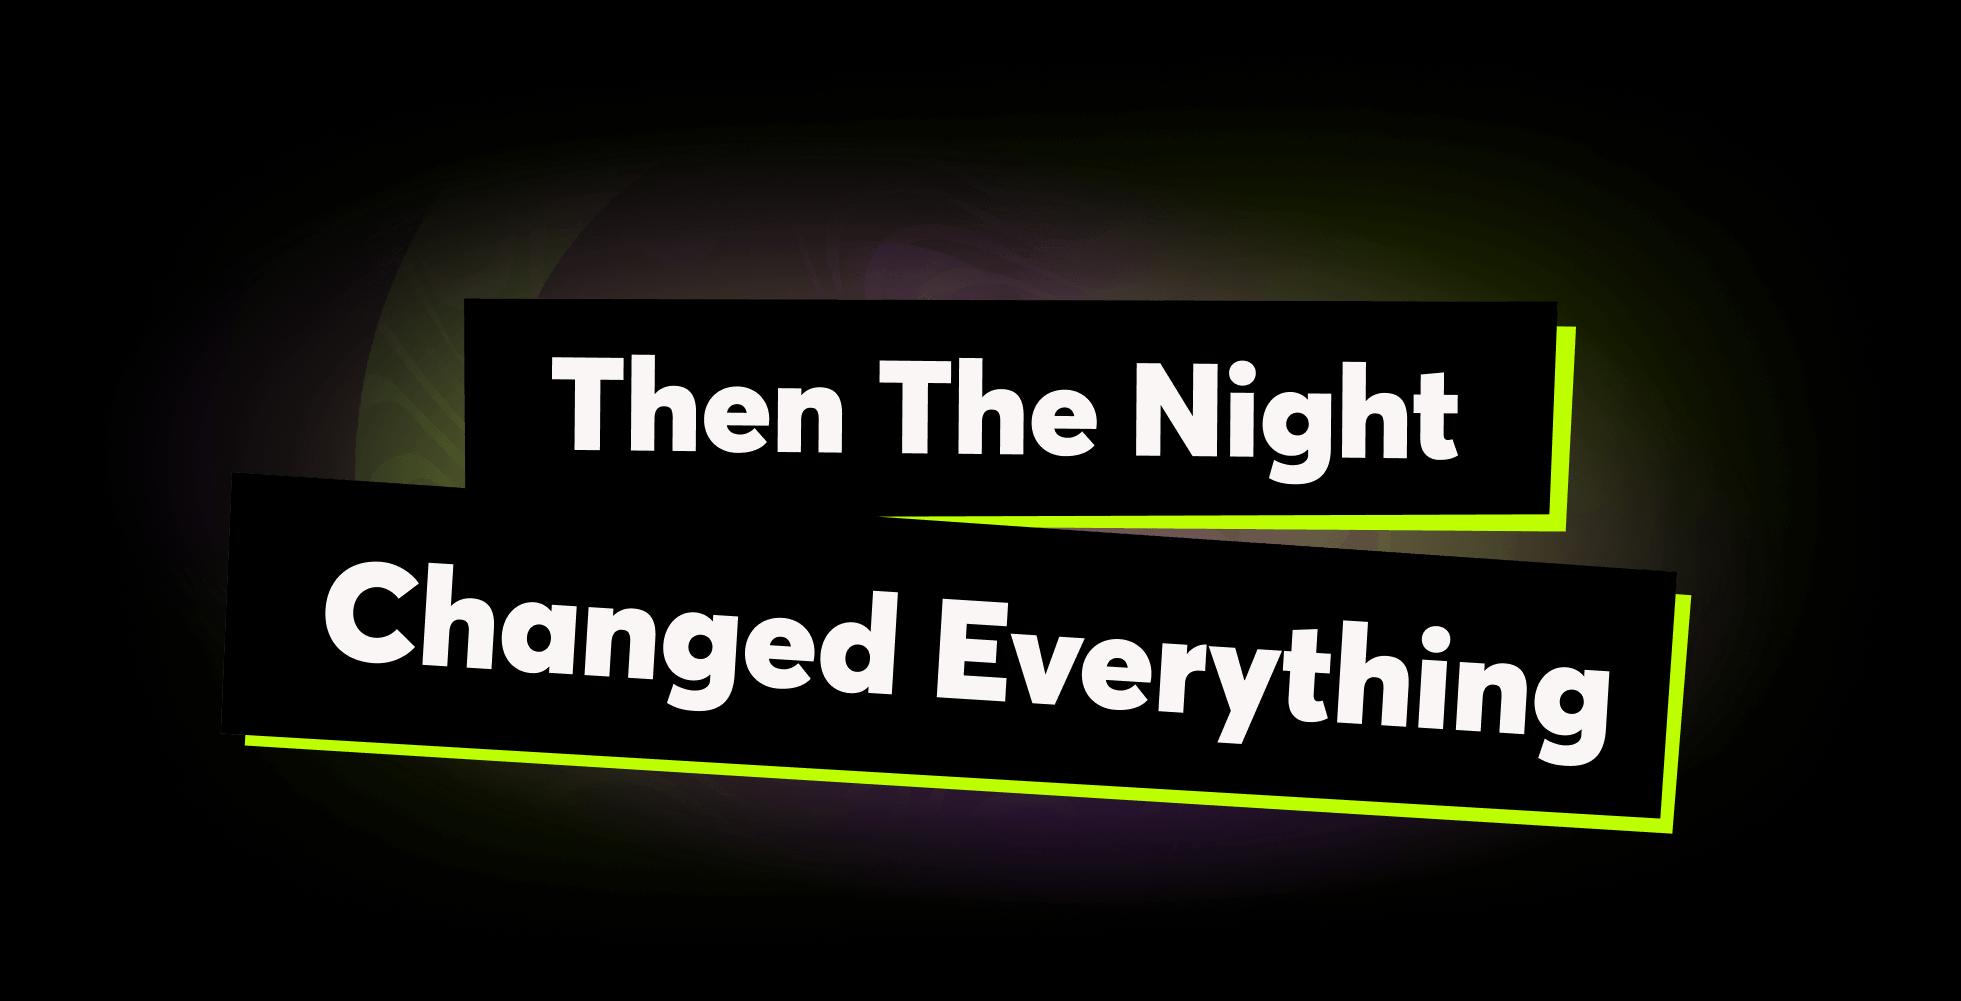 Then the night changed everything